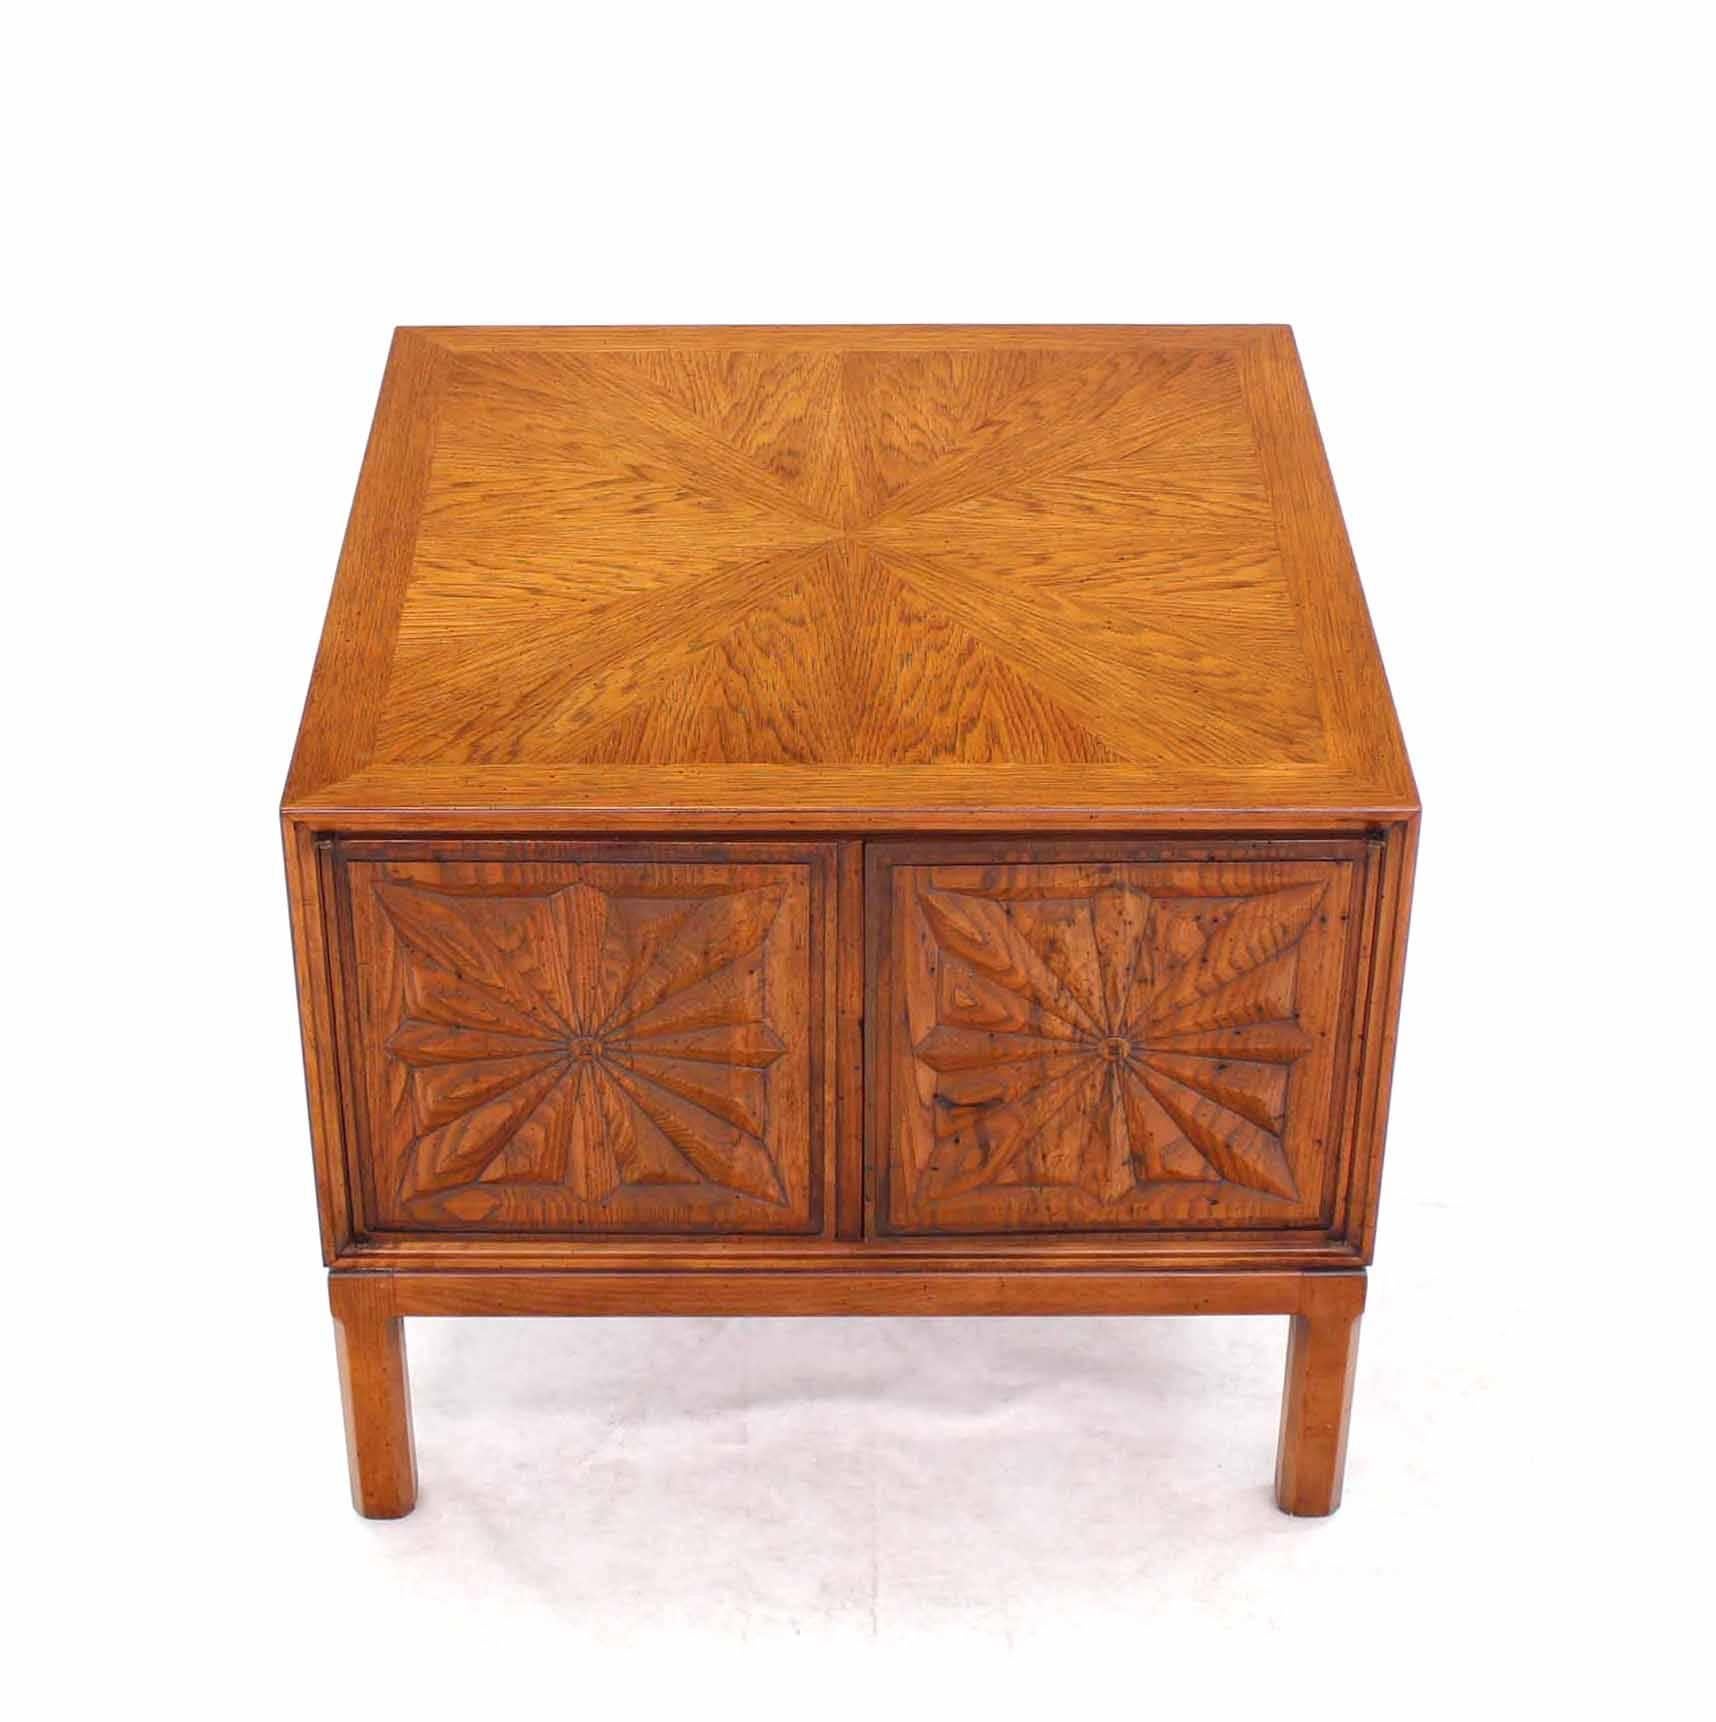 Very nice quality cube shape cabinet or nightstand with carved front double doors cabinet and storage compartment.